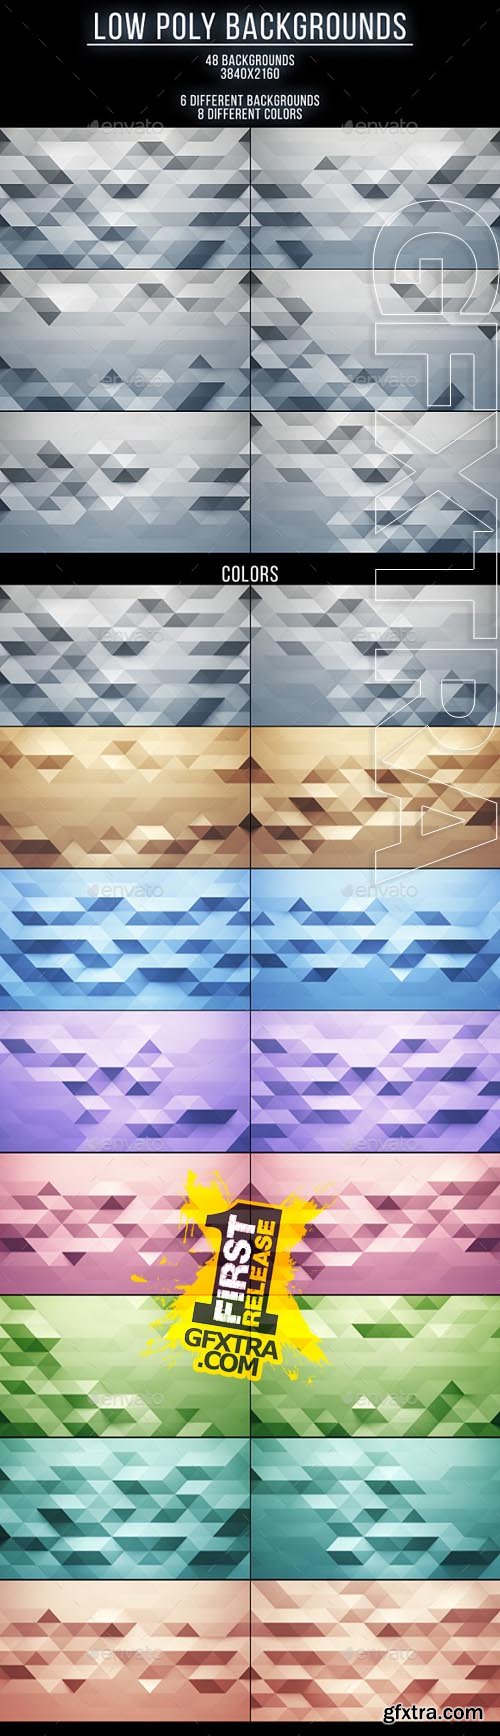 48 Low Poly Backgrounds 13153459